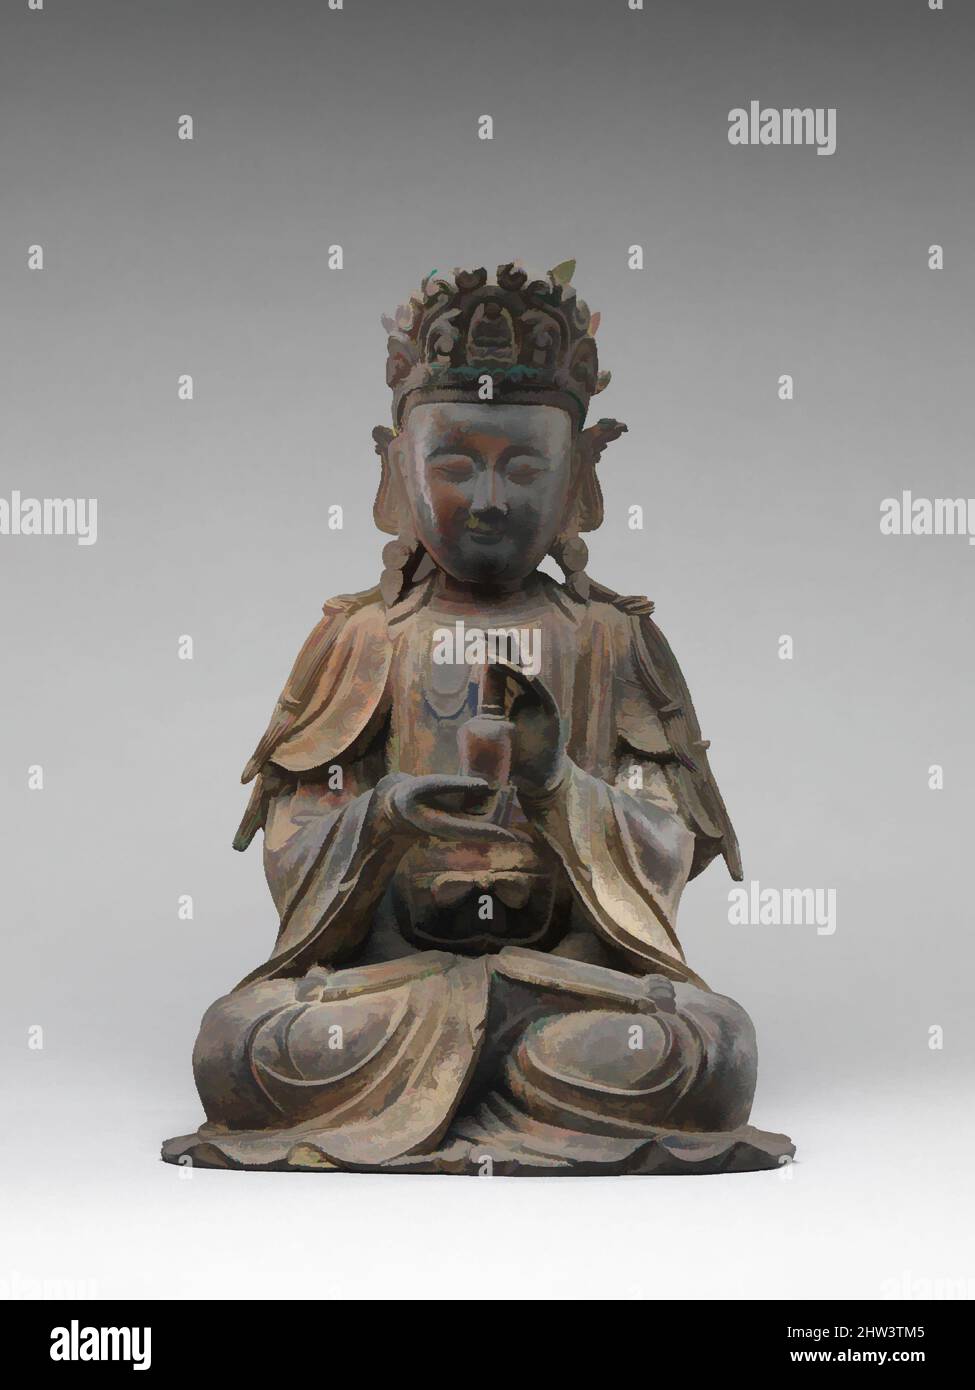 Art inspired by Bodhisattva, possibly Avalokiteshvara (Guanyin 觀音菩薩), Bodhisattva Avalokiteshvara, Ming dynasty (1368–1644), 15th–16th century, China, Leaded brass, lost-wax cast, H. 15 1/8 in. (38.4 cm), Sculpture, Classic works modernized by Artotop with a splash of modernity. Shapes, color and value, eye-catching visual impact on art. Emotions through freedom of artworks in a contemporary way. A timeless message pursuing a wildly creative new direction. Artists turning to the digital medium and creating the Artotop NFT Stock Photo